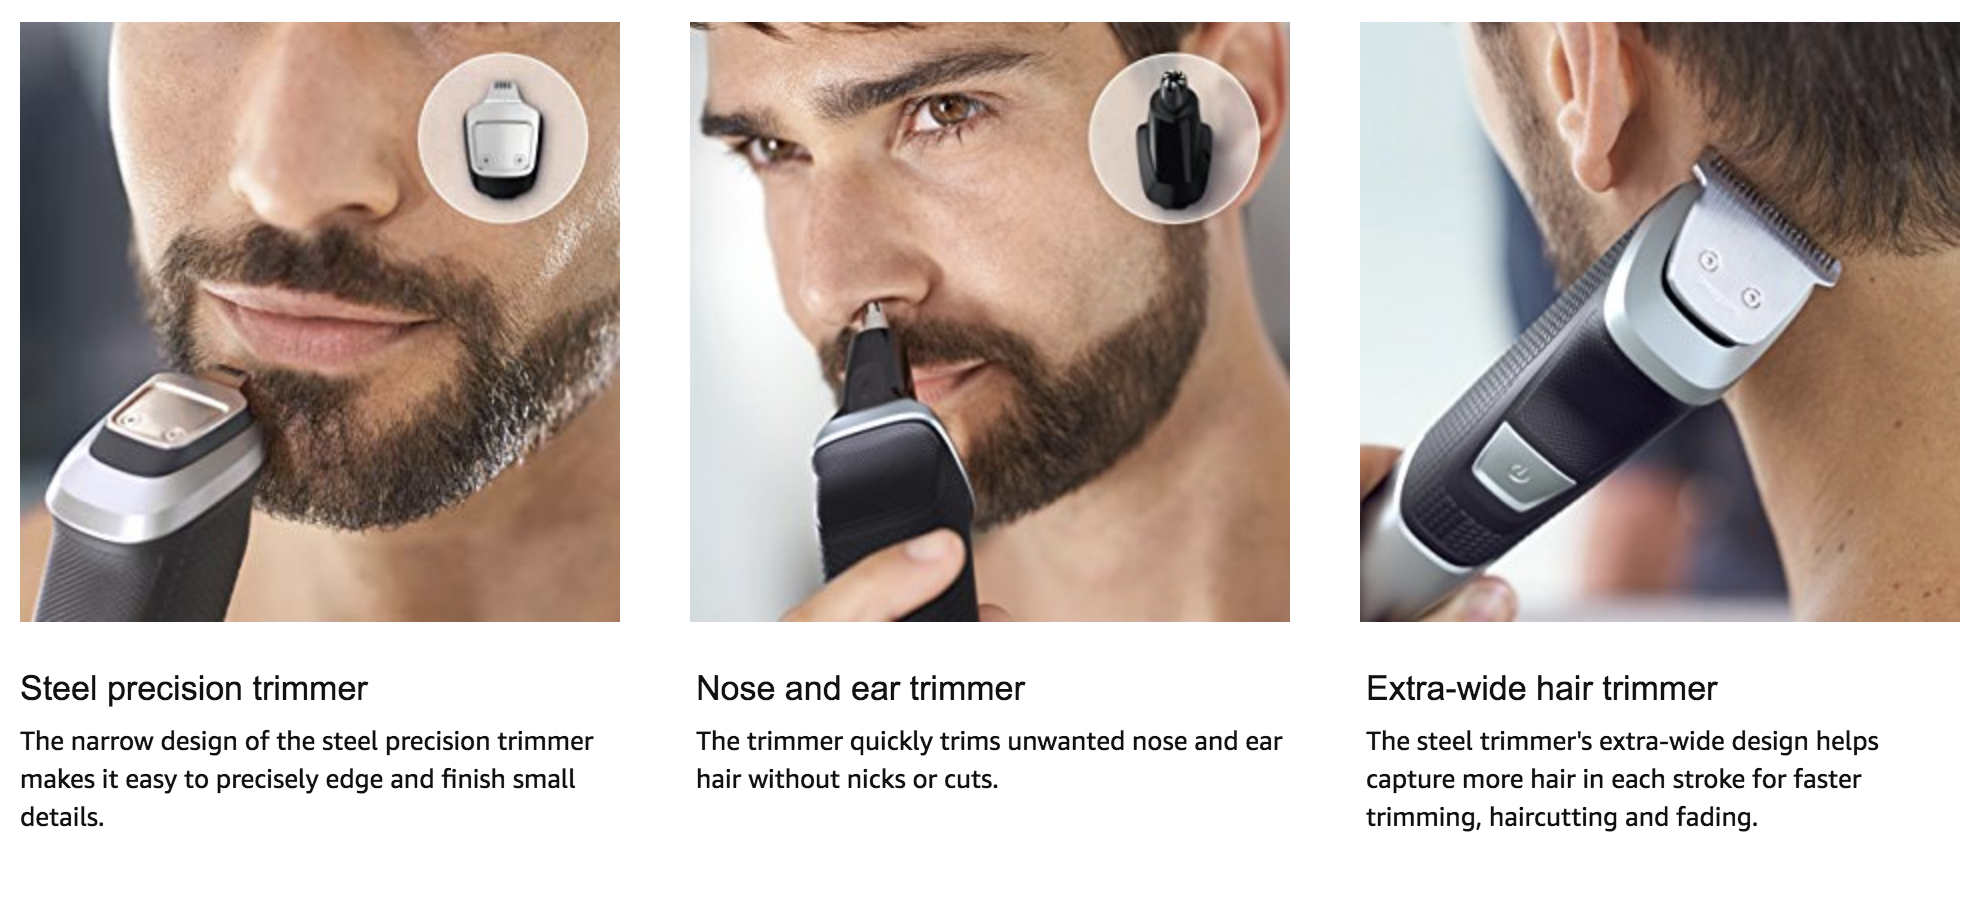 extra wide hair trimmer